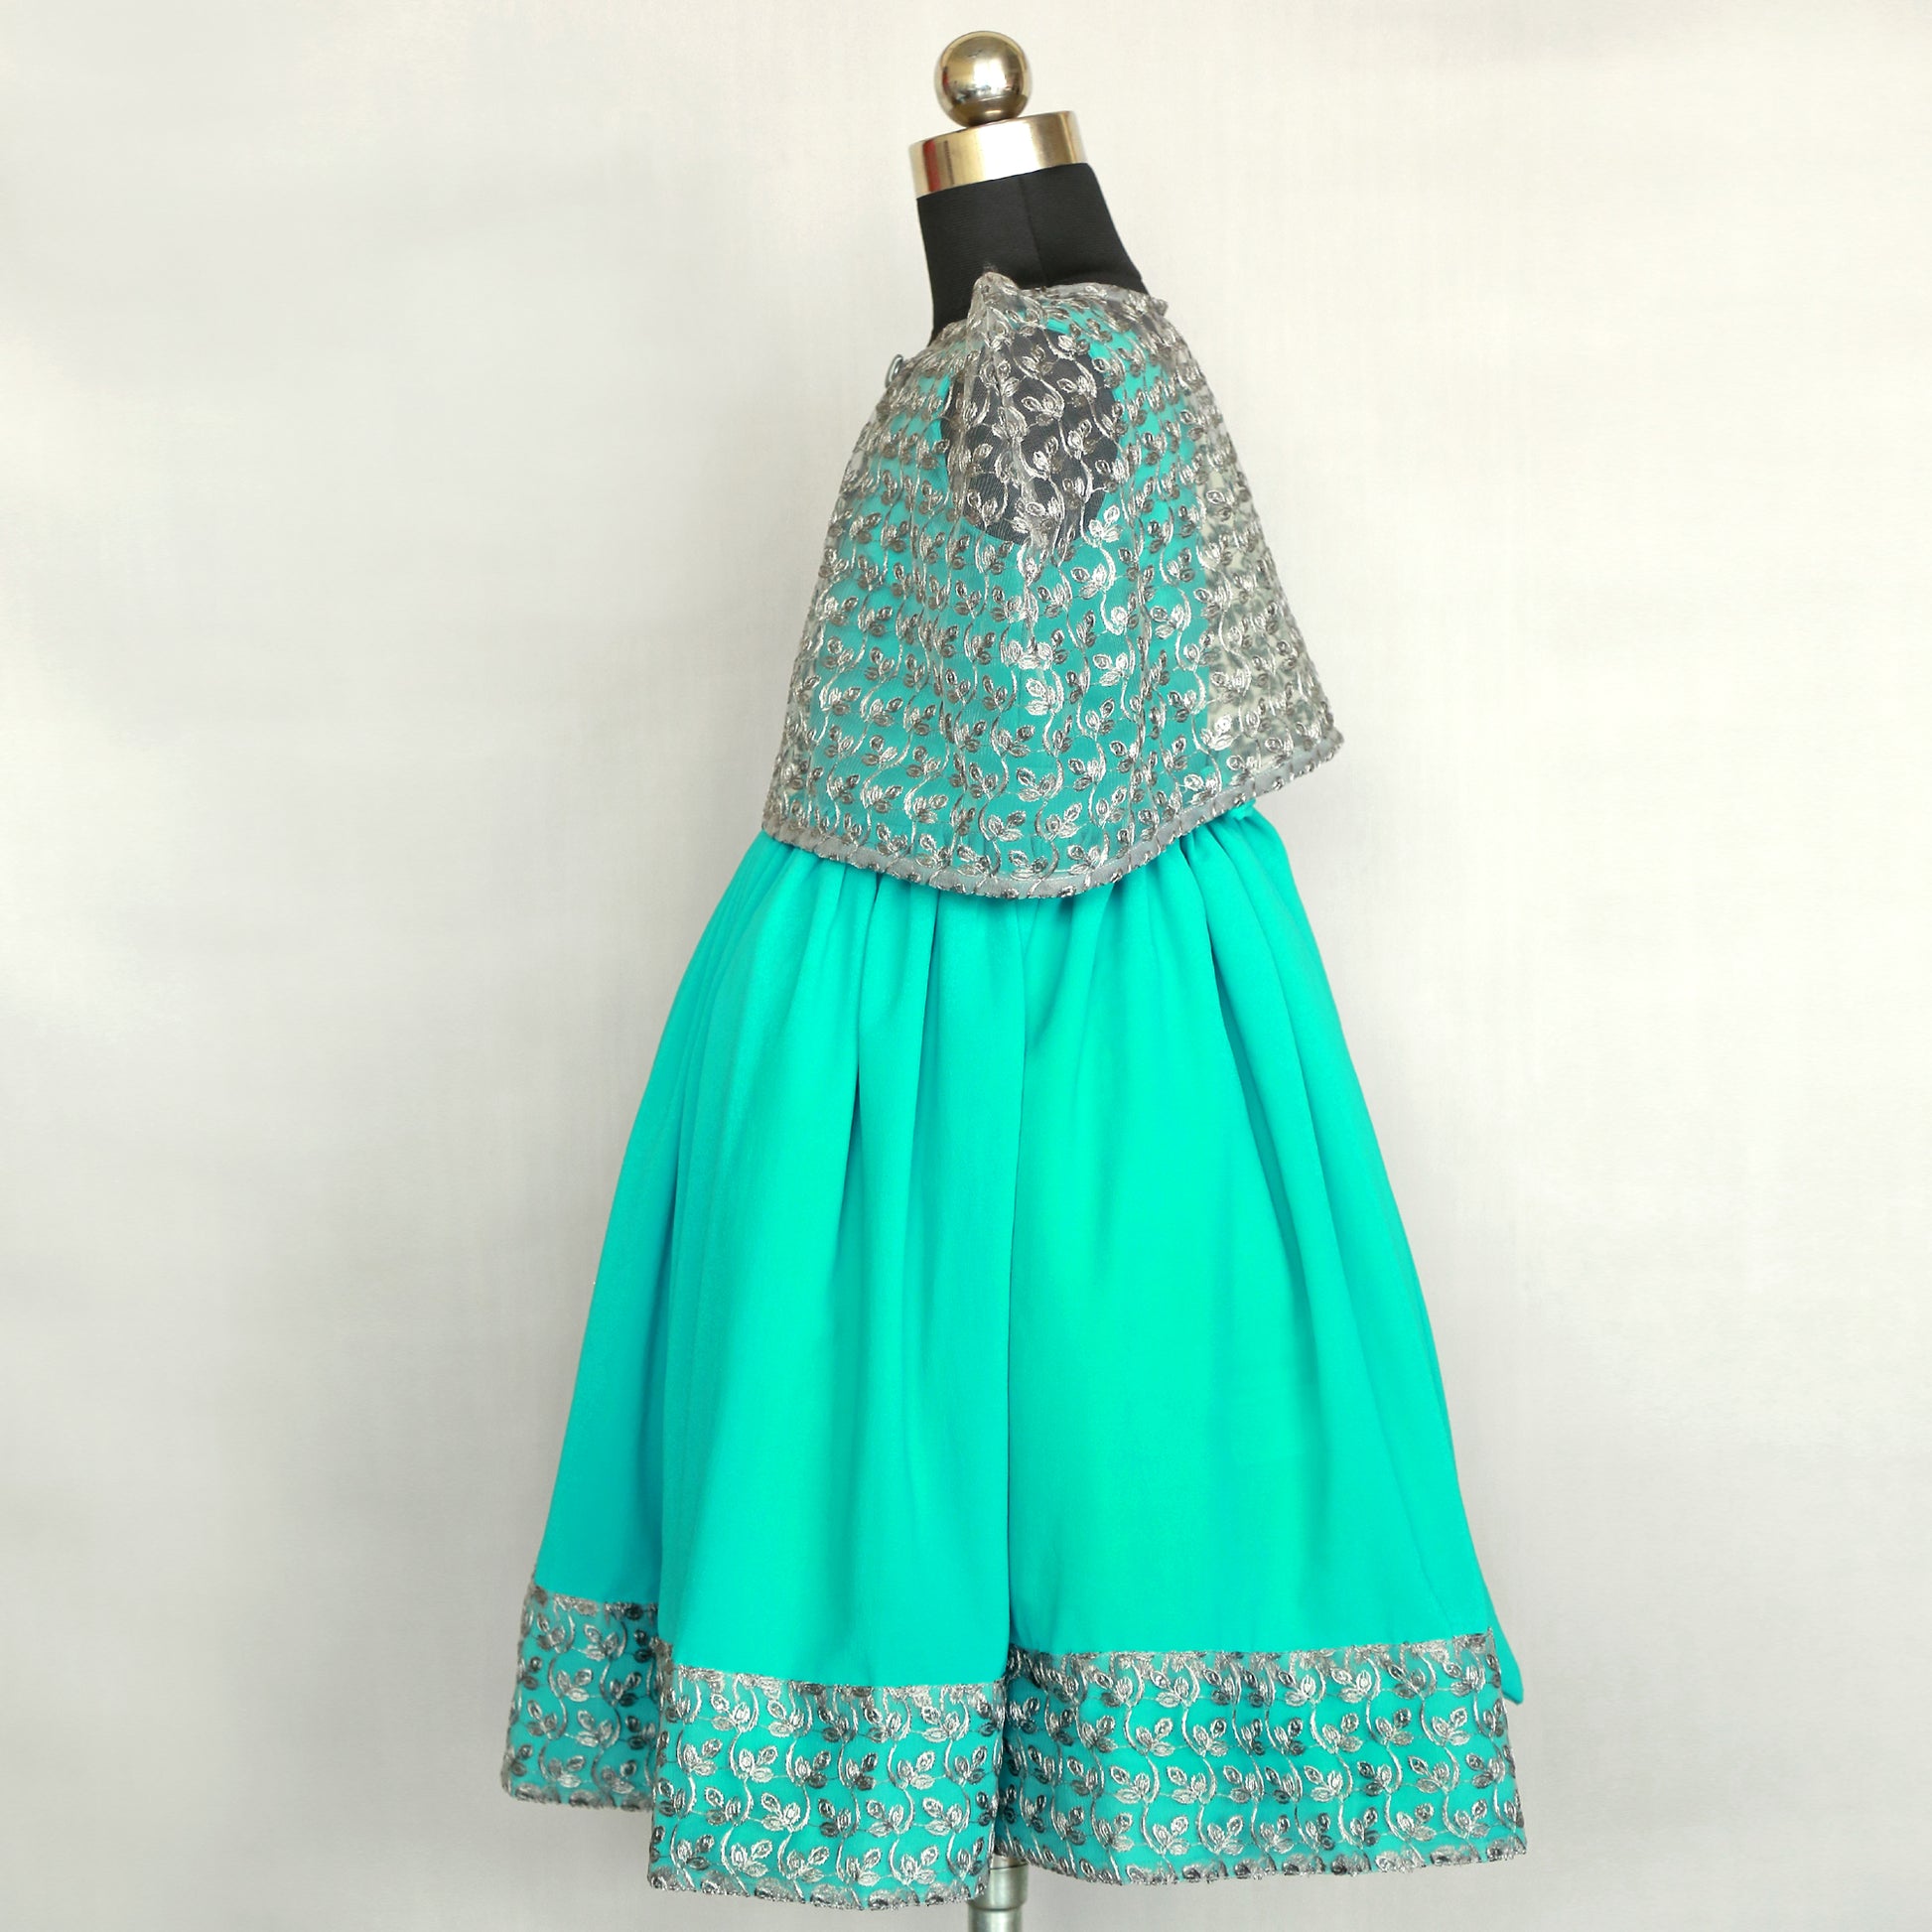 HEYKIDOO Kids Girls Embroidered Cape with Solid Party Frock-Sea Green - HEYKIDOO